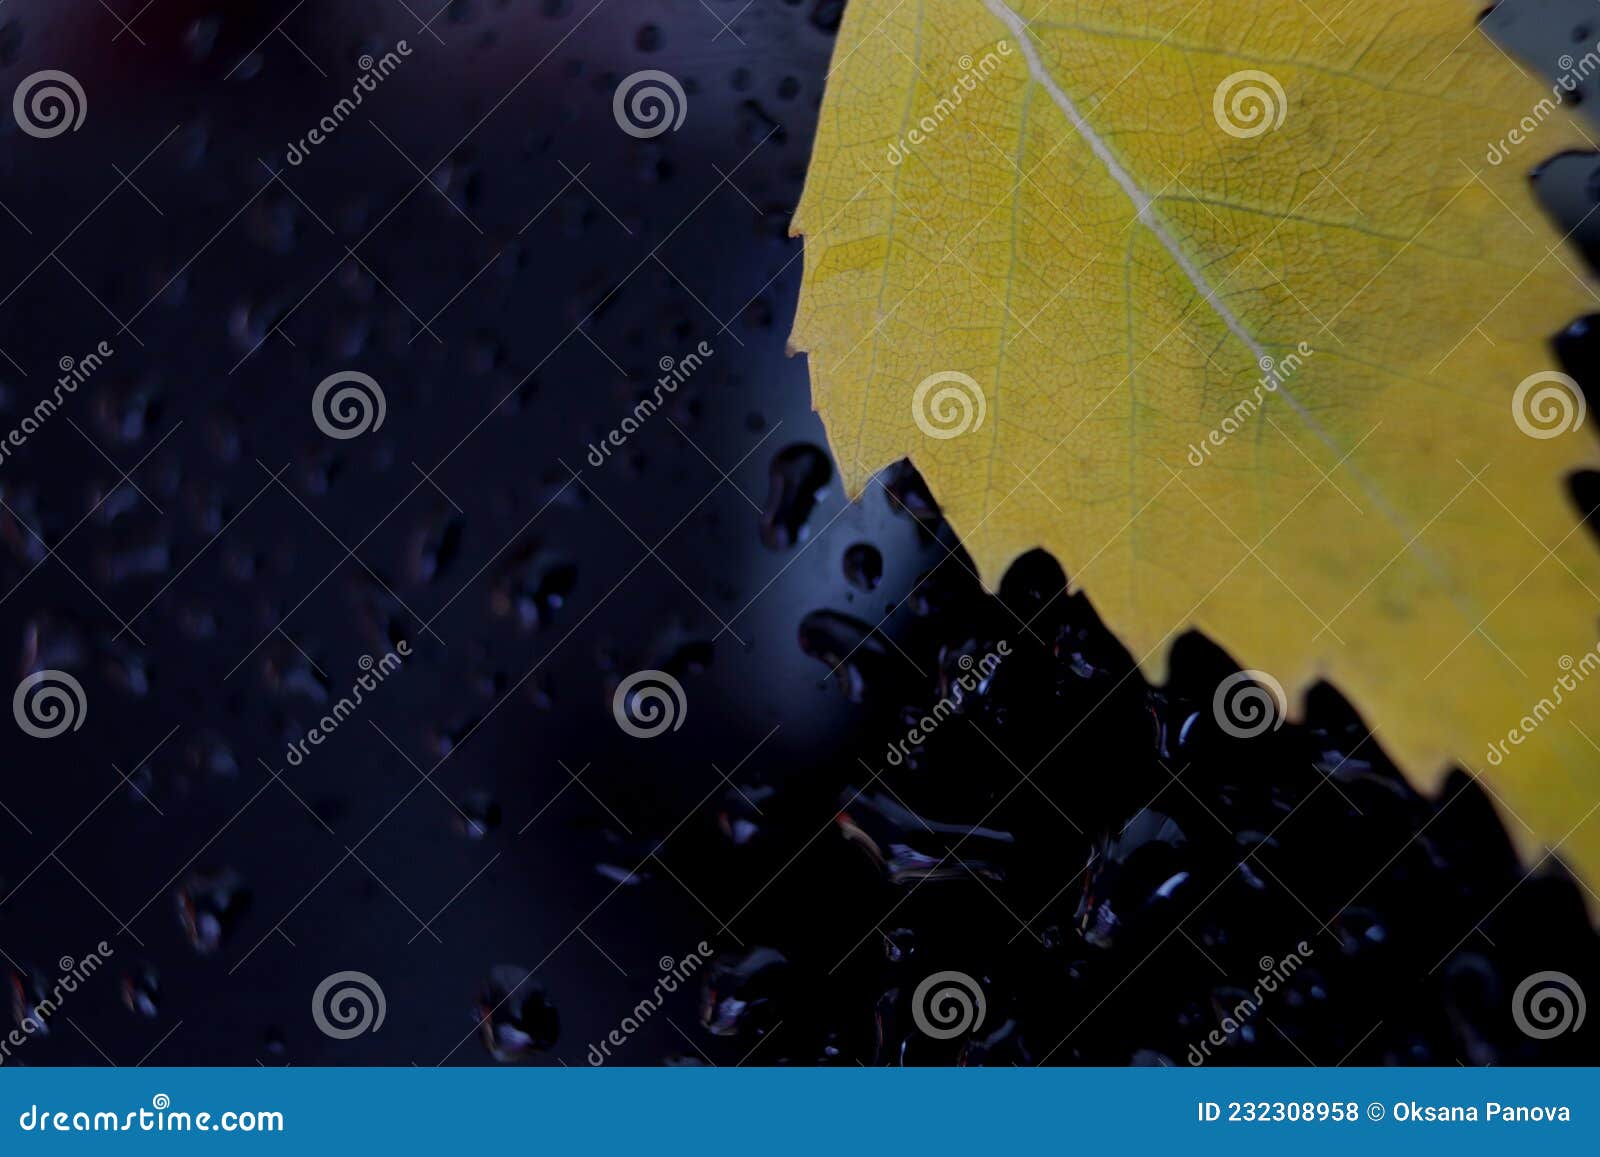 yellow autumn leaf on a dark background with water drops, macro photography